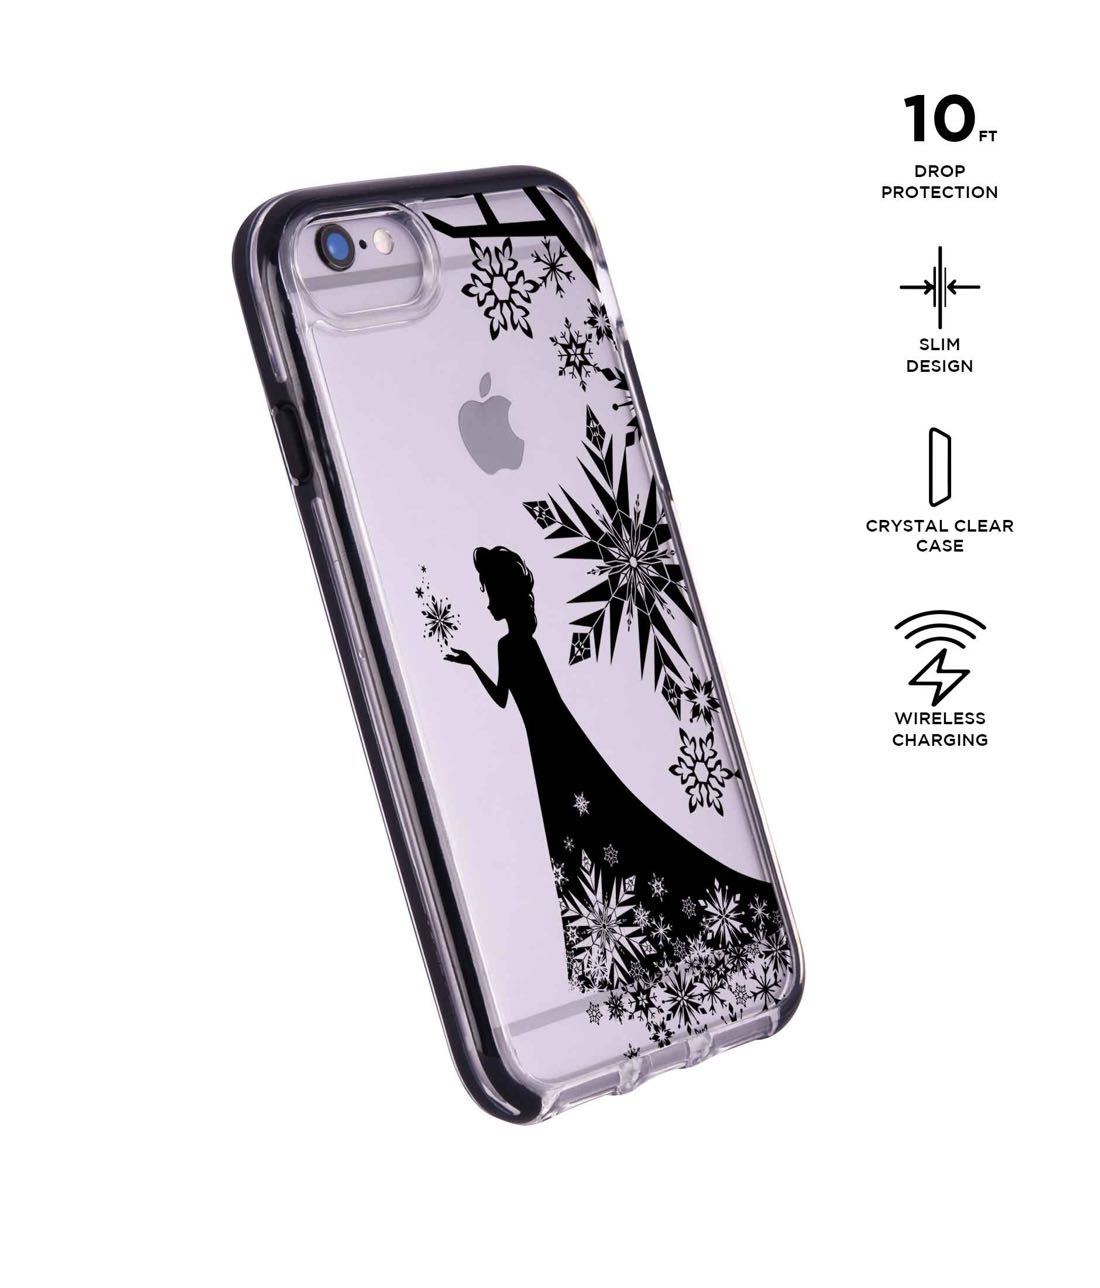 Elsa Silhouette - Extreme Phone Case for iPhone 6S